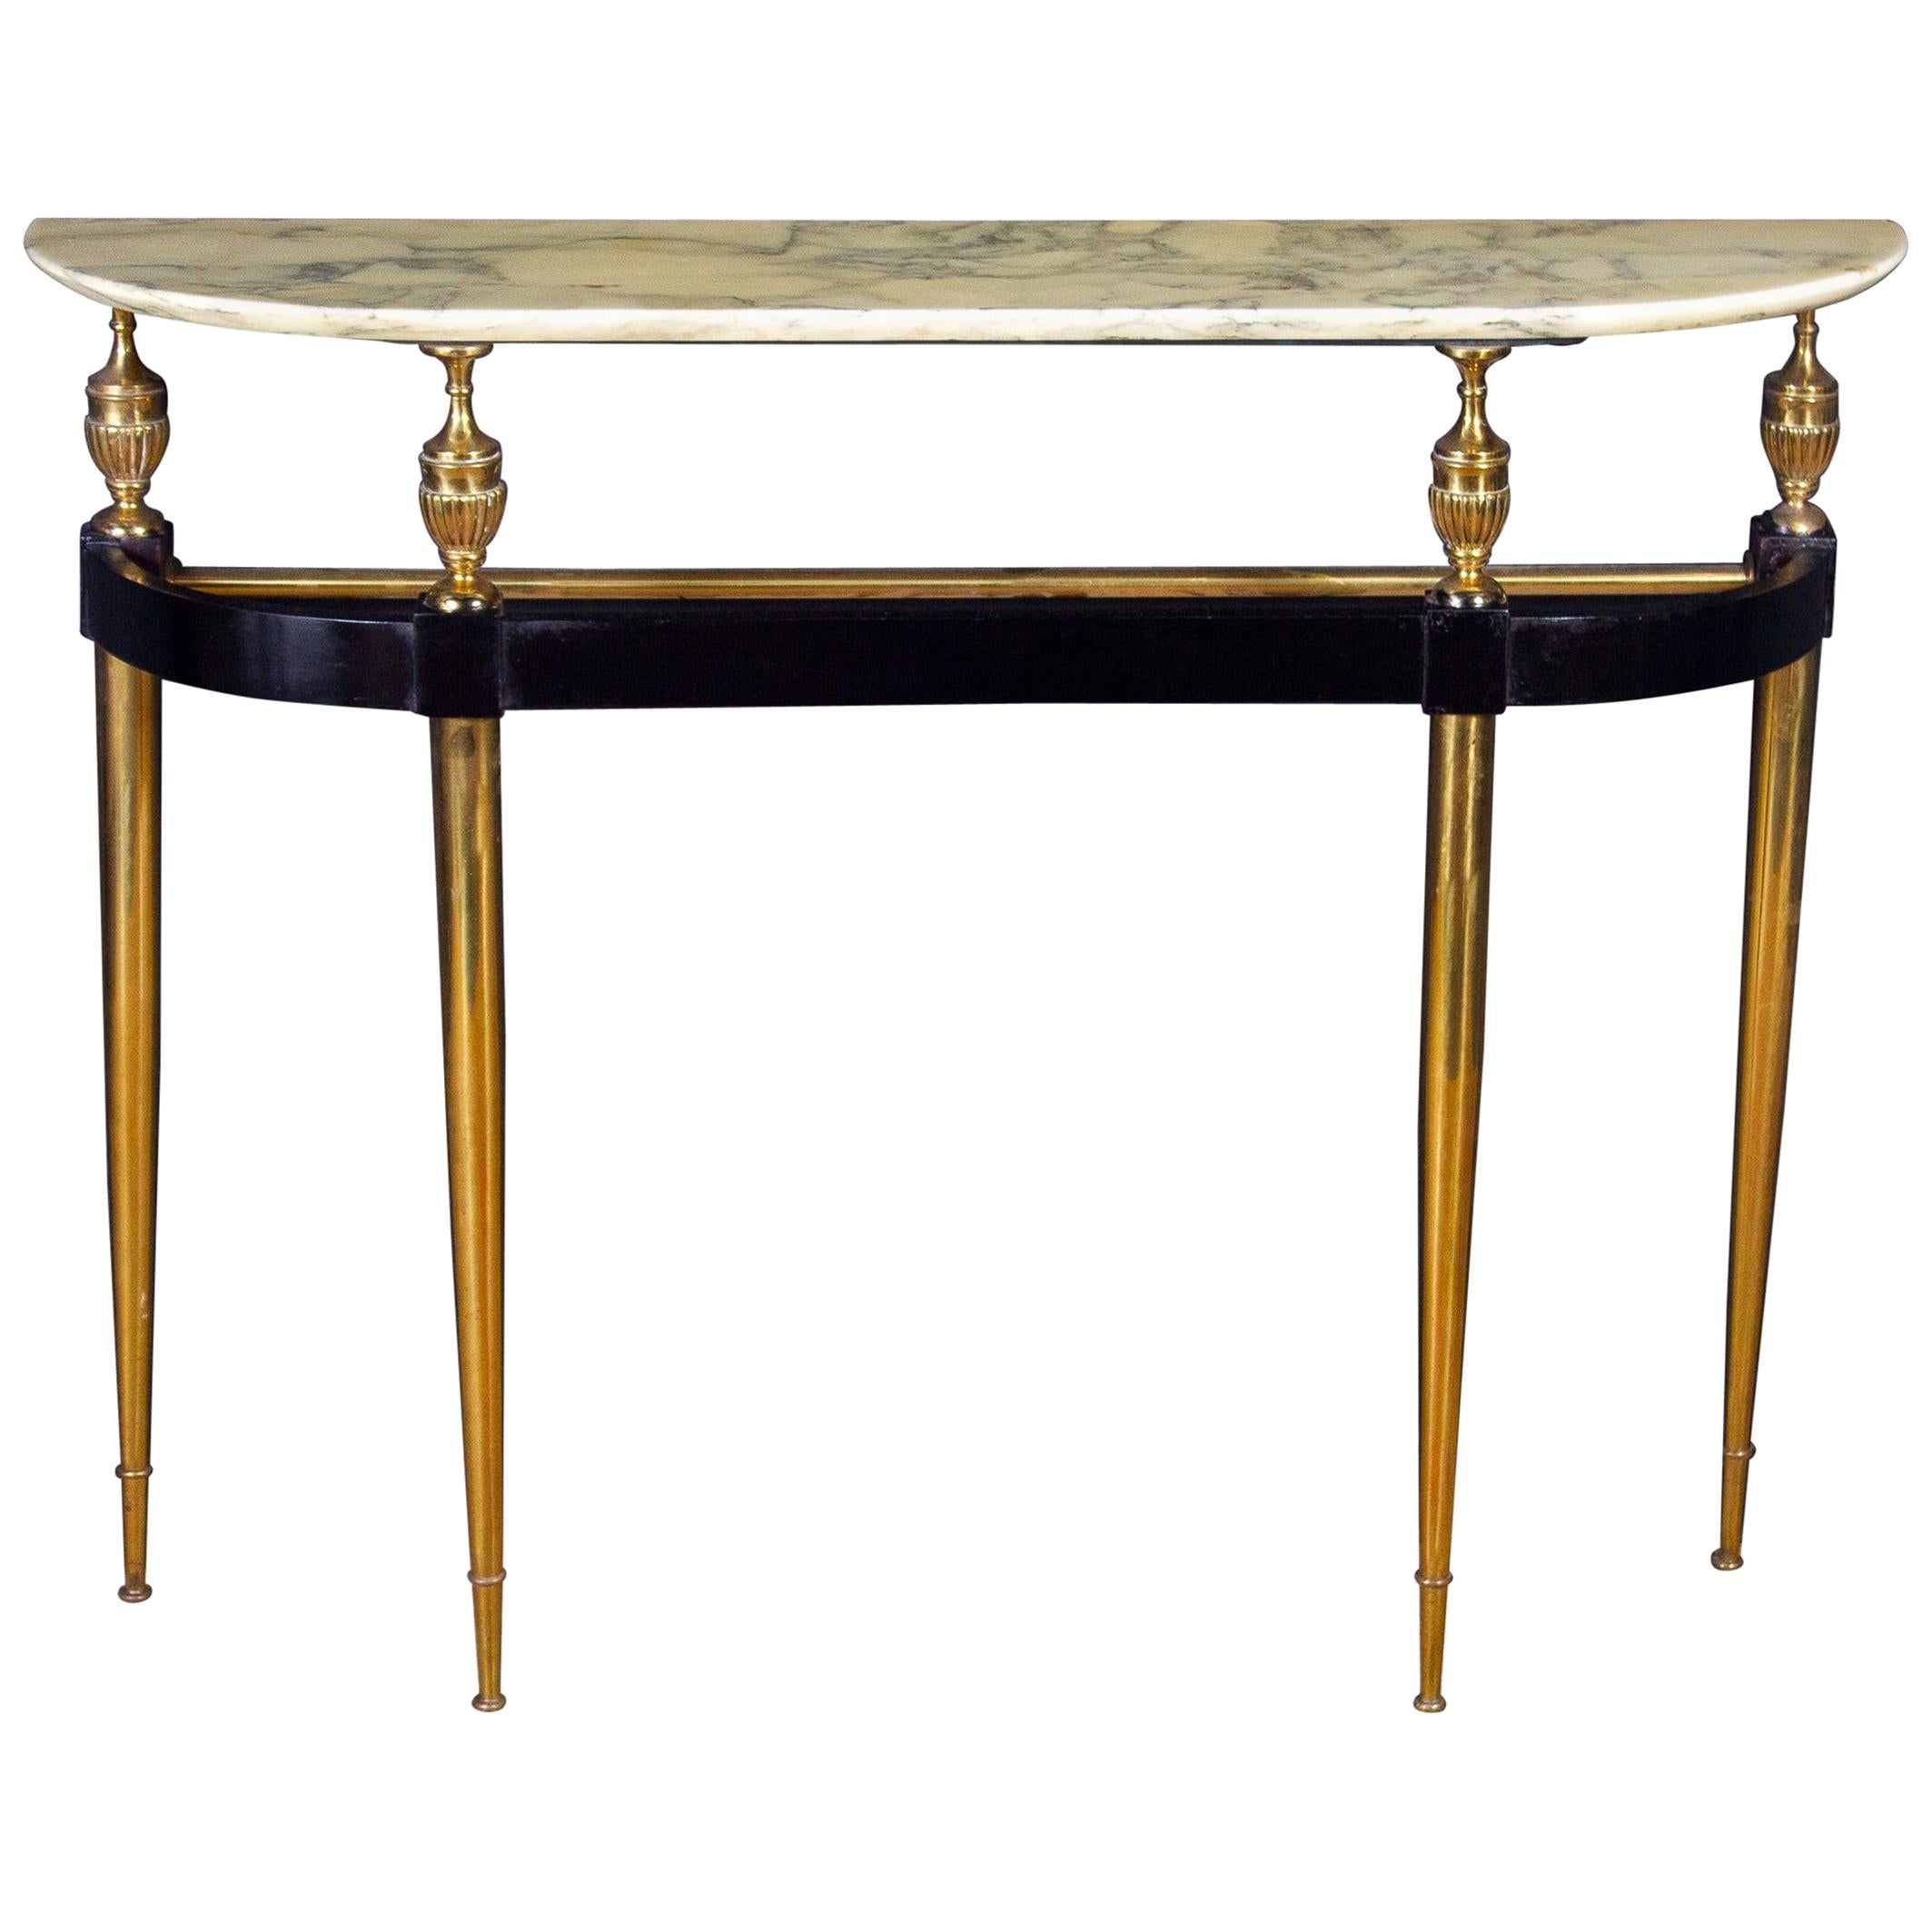 Midcentury Oval Shaped Gilt Bronze Console Table Italy, 1950